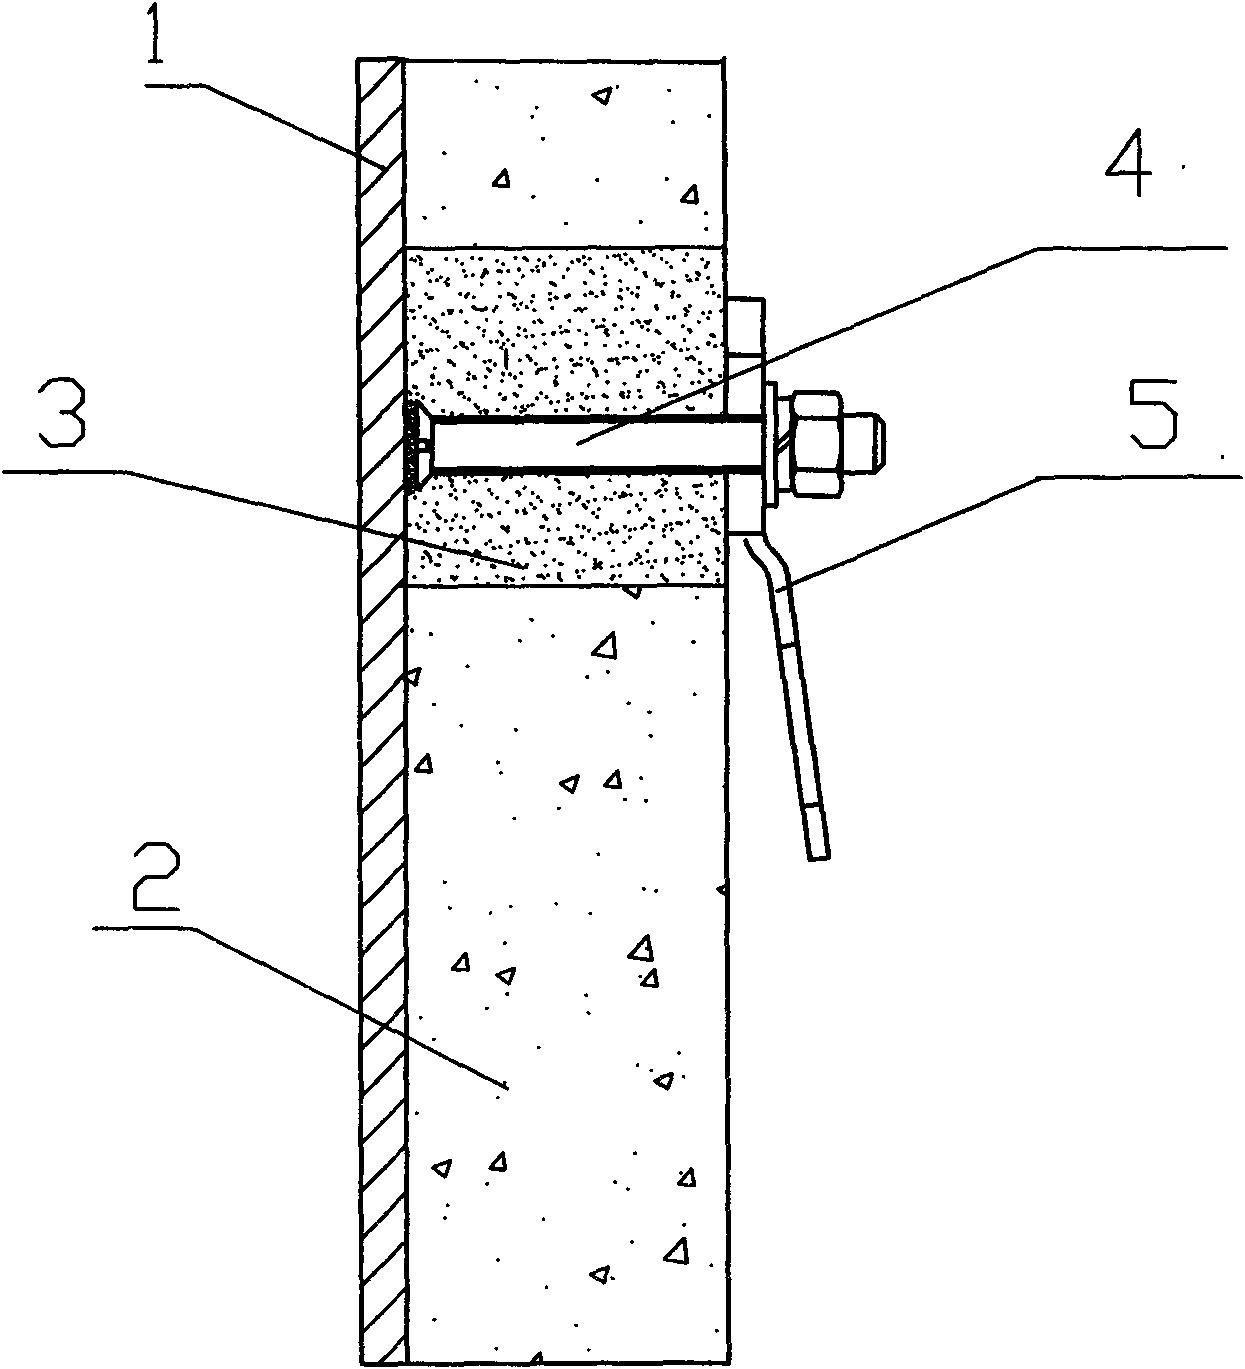 High-strength fireproofing heat-insulating decorative board provided with internal fixed connecting members